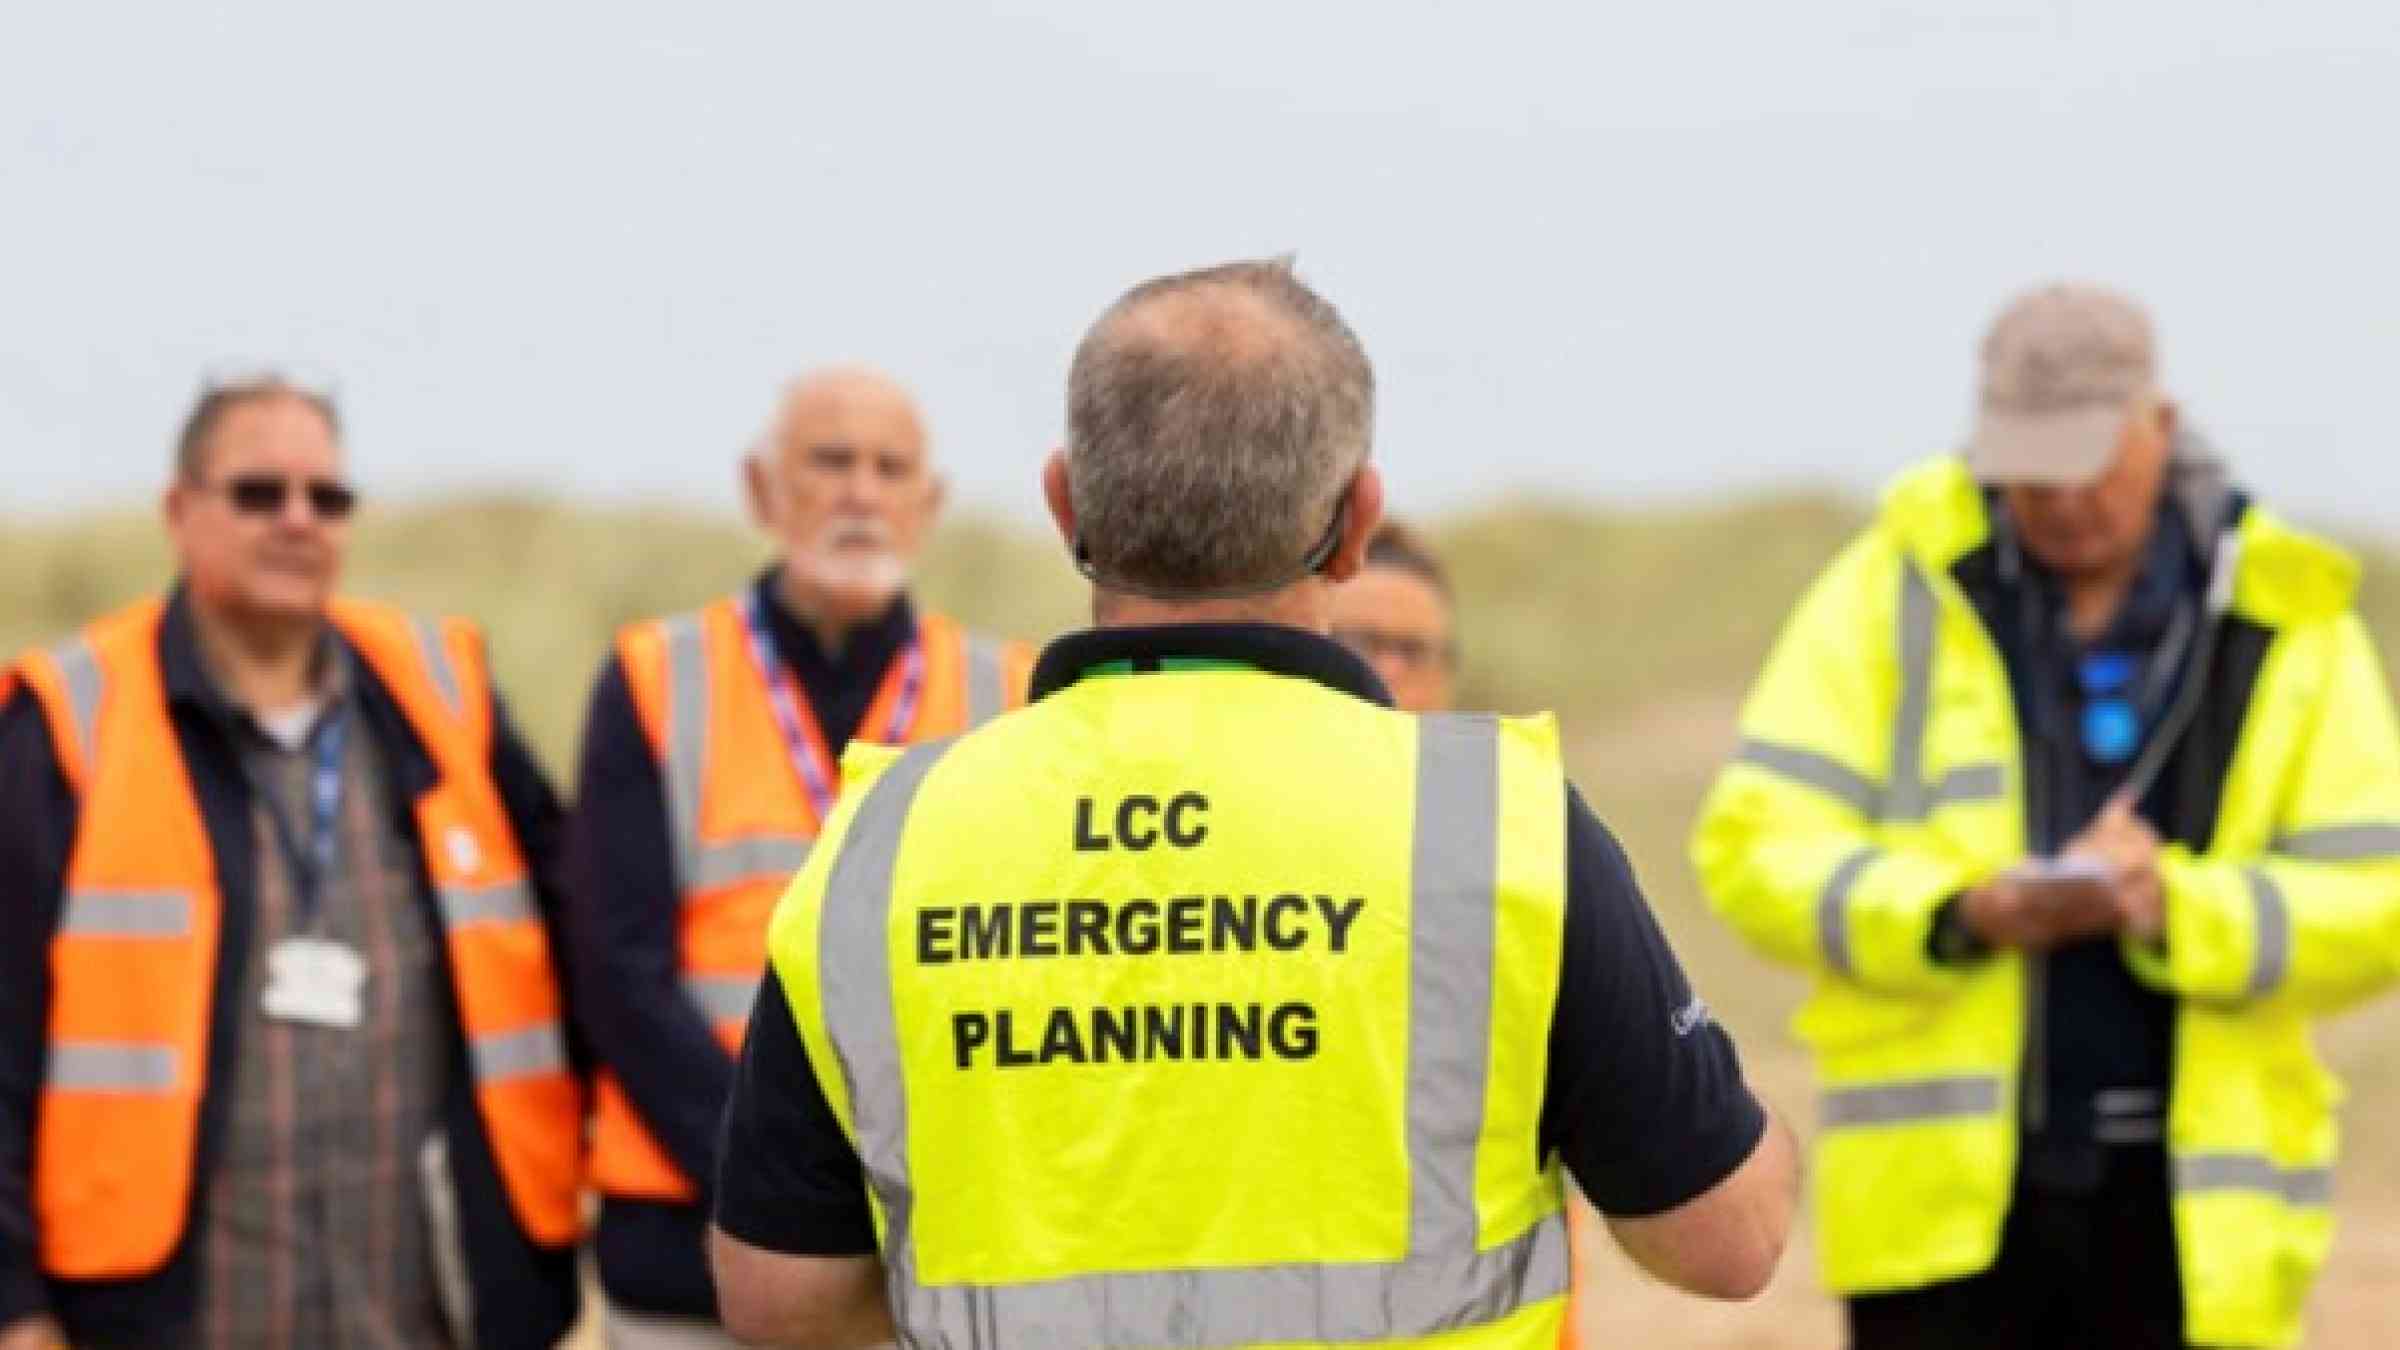 Lincolnshire in the UK prepares for major emergencies with digital twins and drones